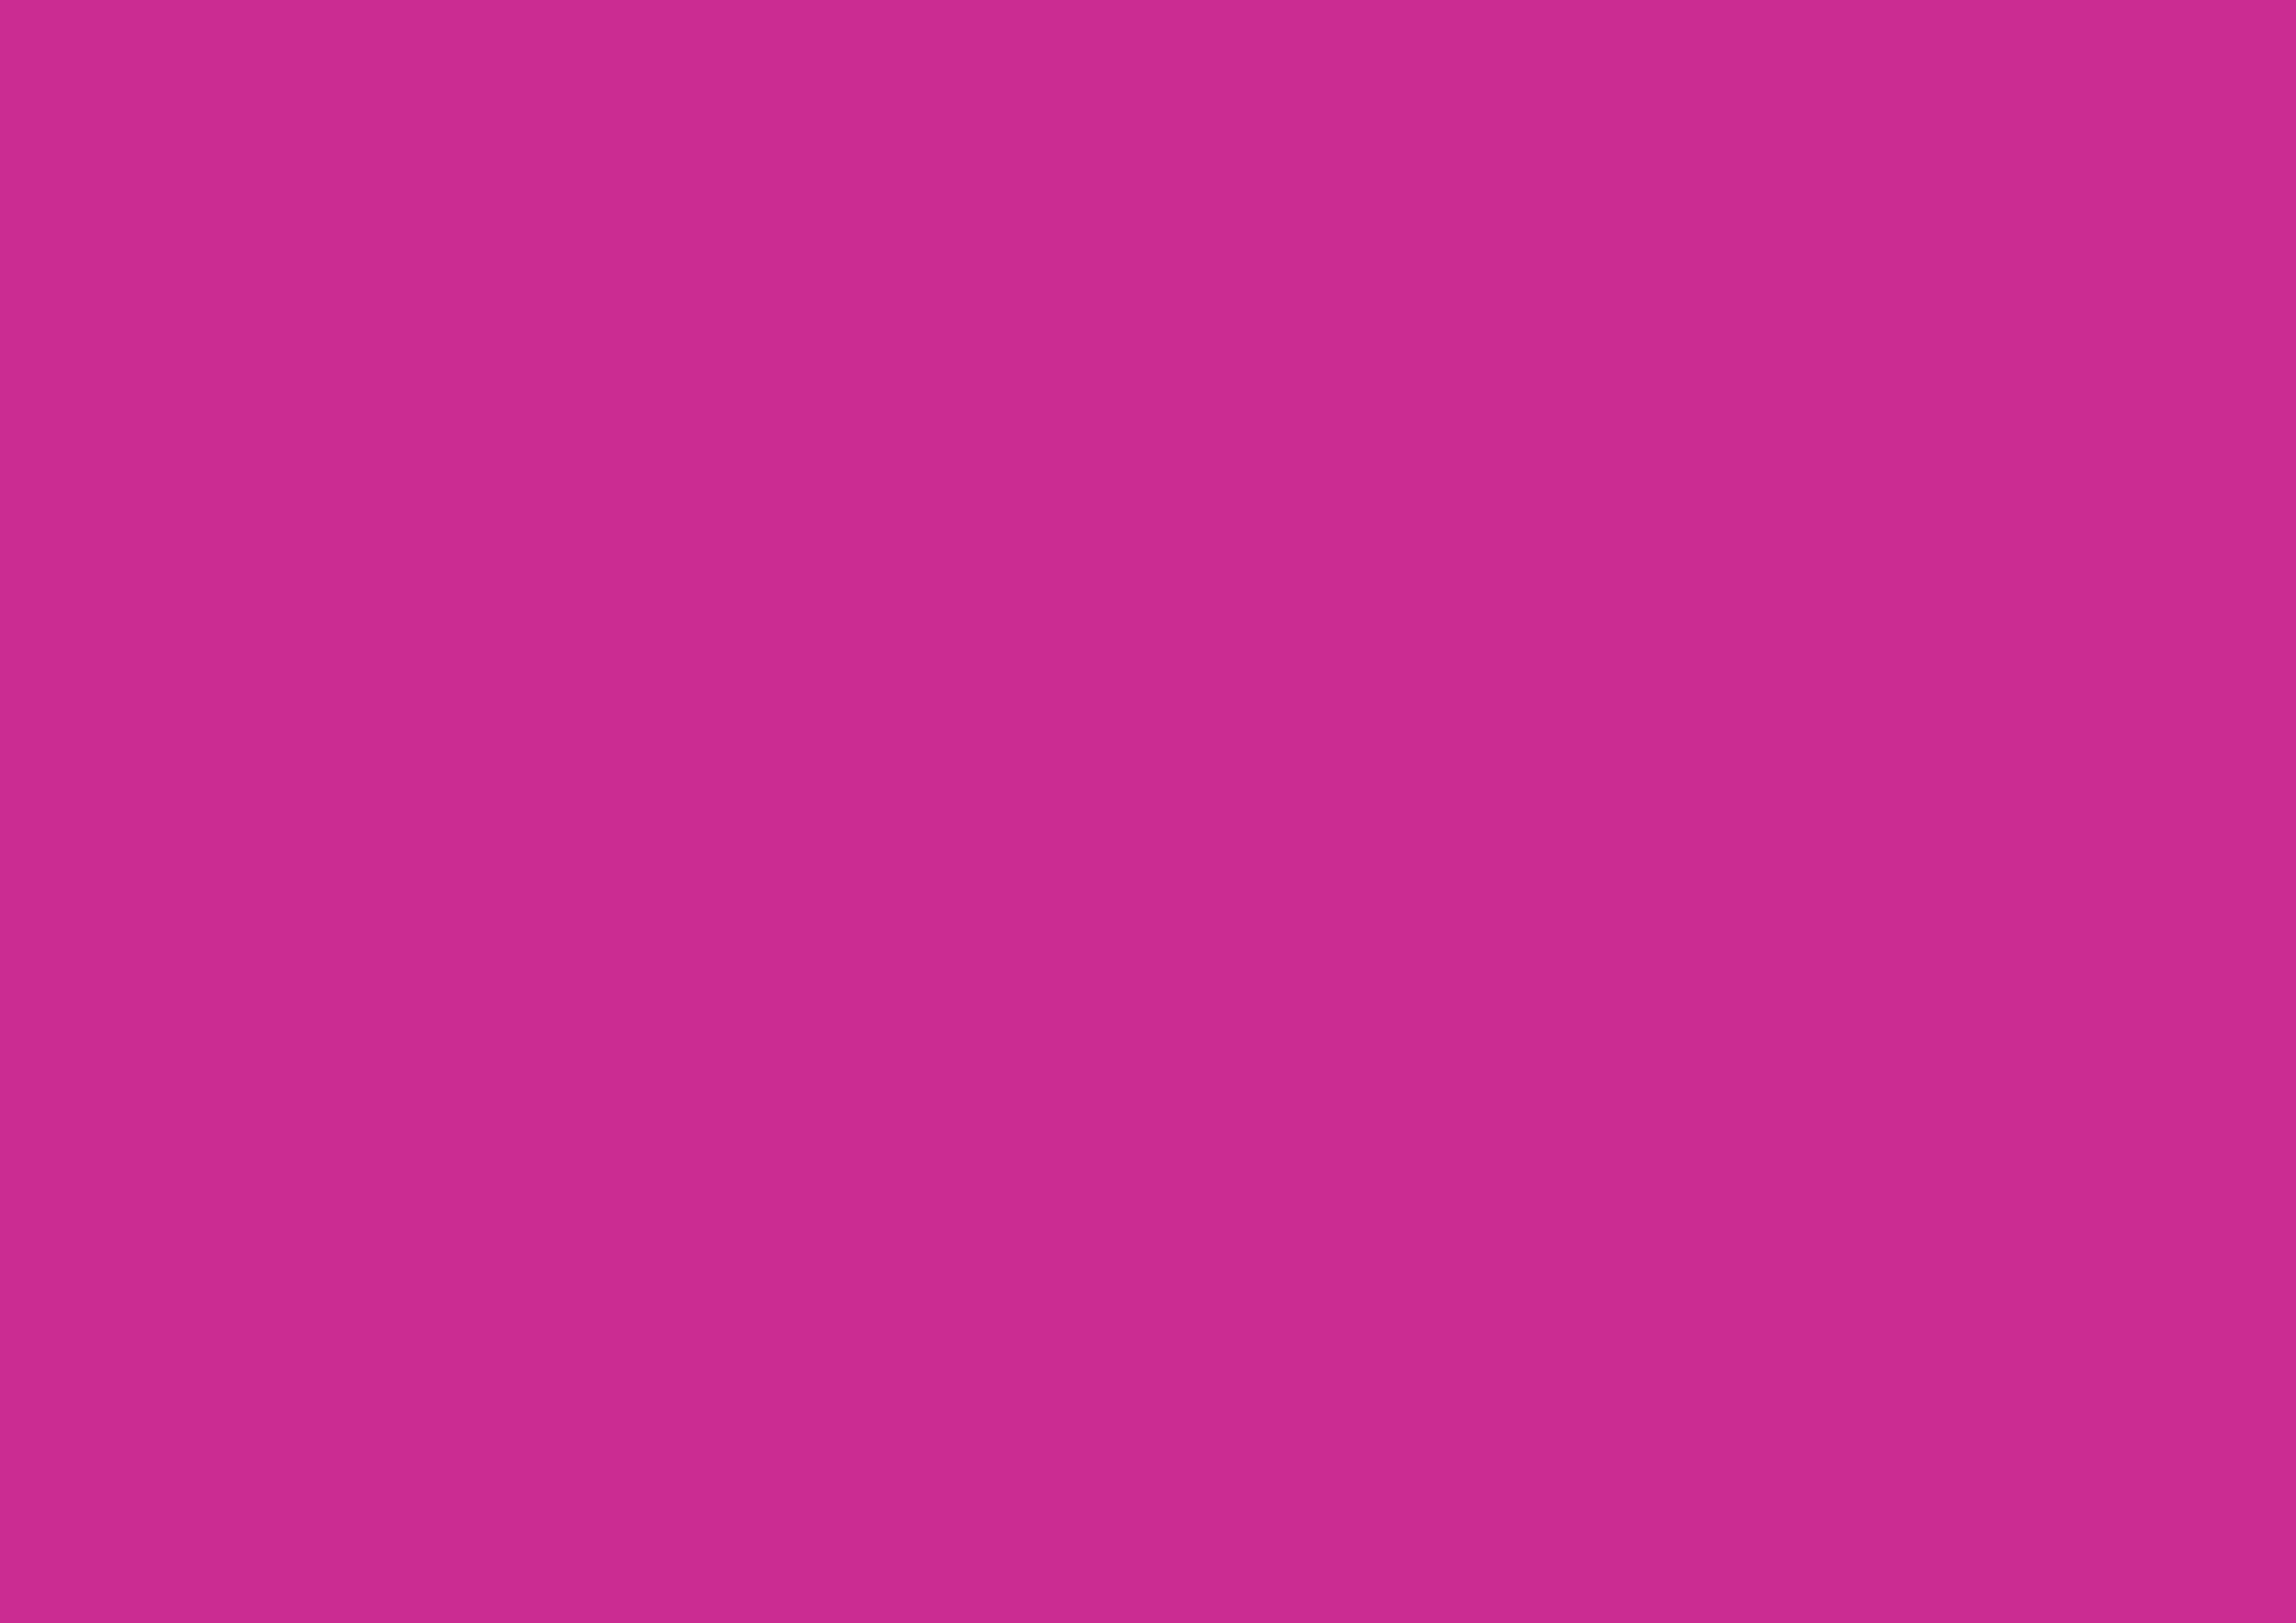 3508x2480 Royal Fuchsia Solid Color Background